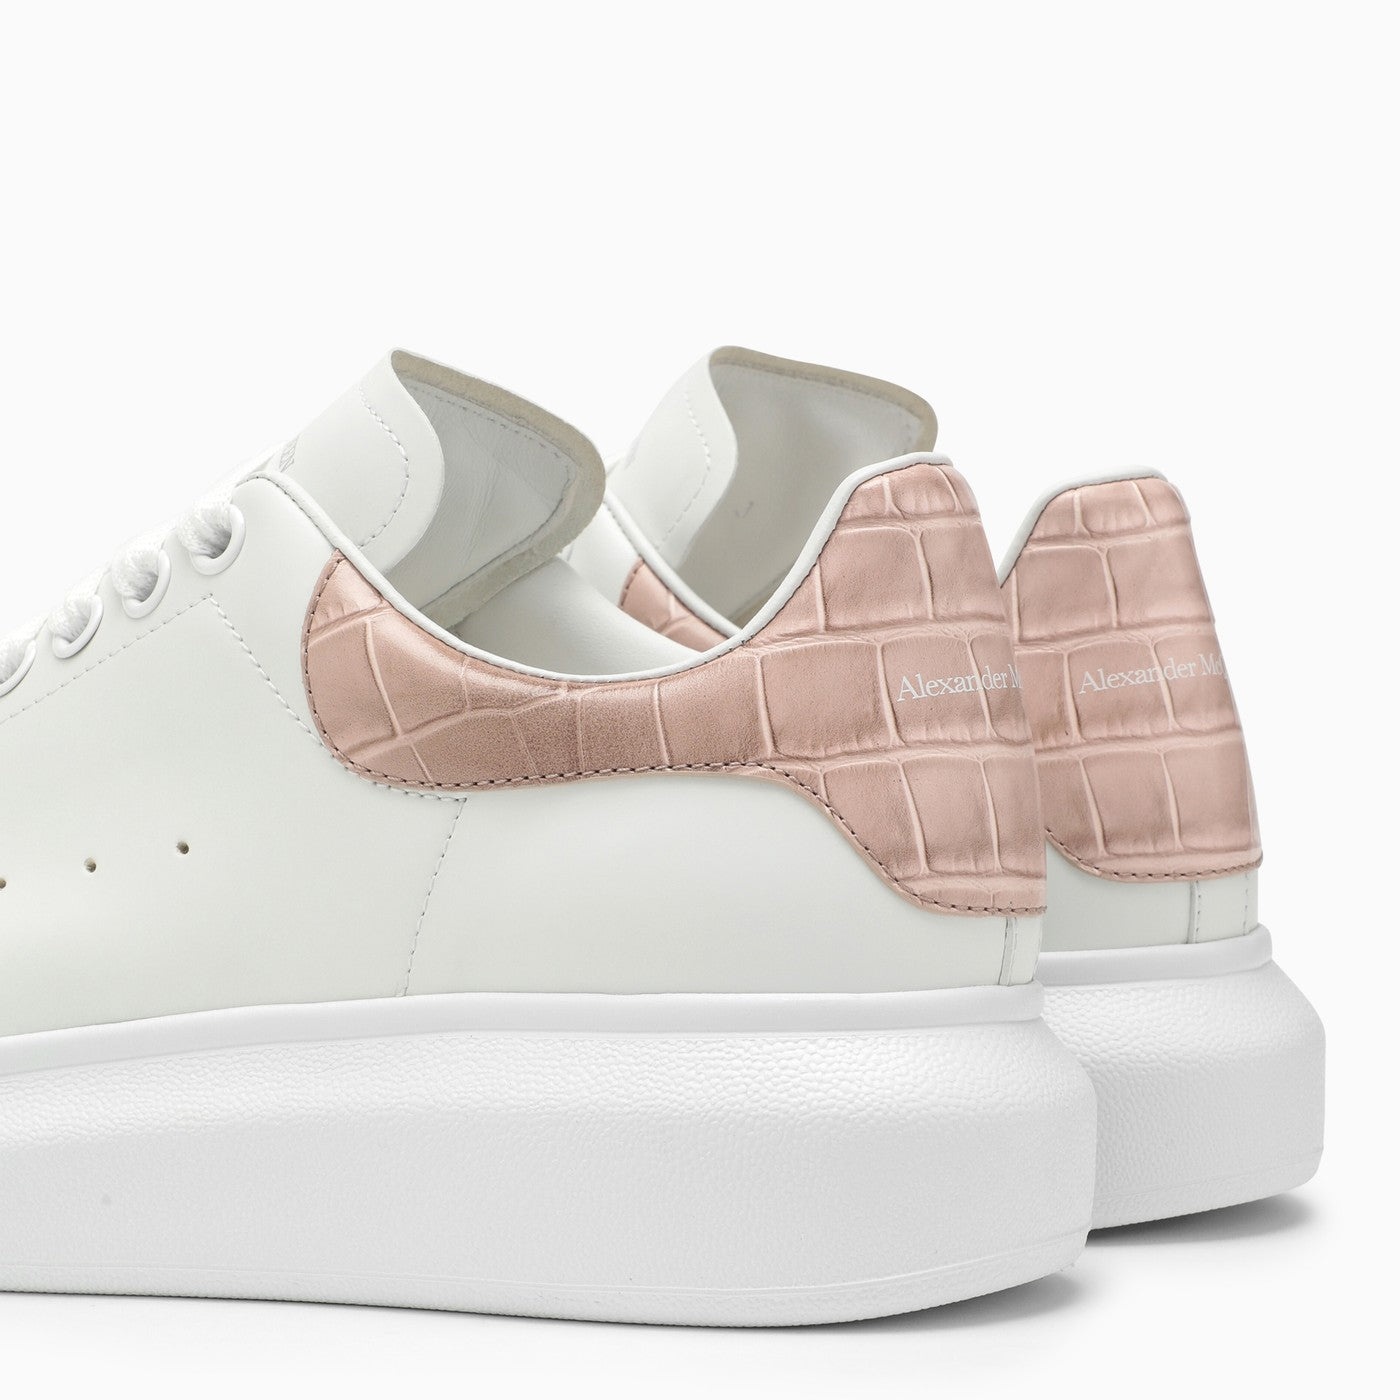 Alexander Mc Queen White And Clay Oversized Sneakers - 5